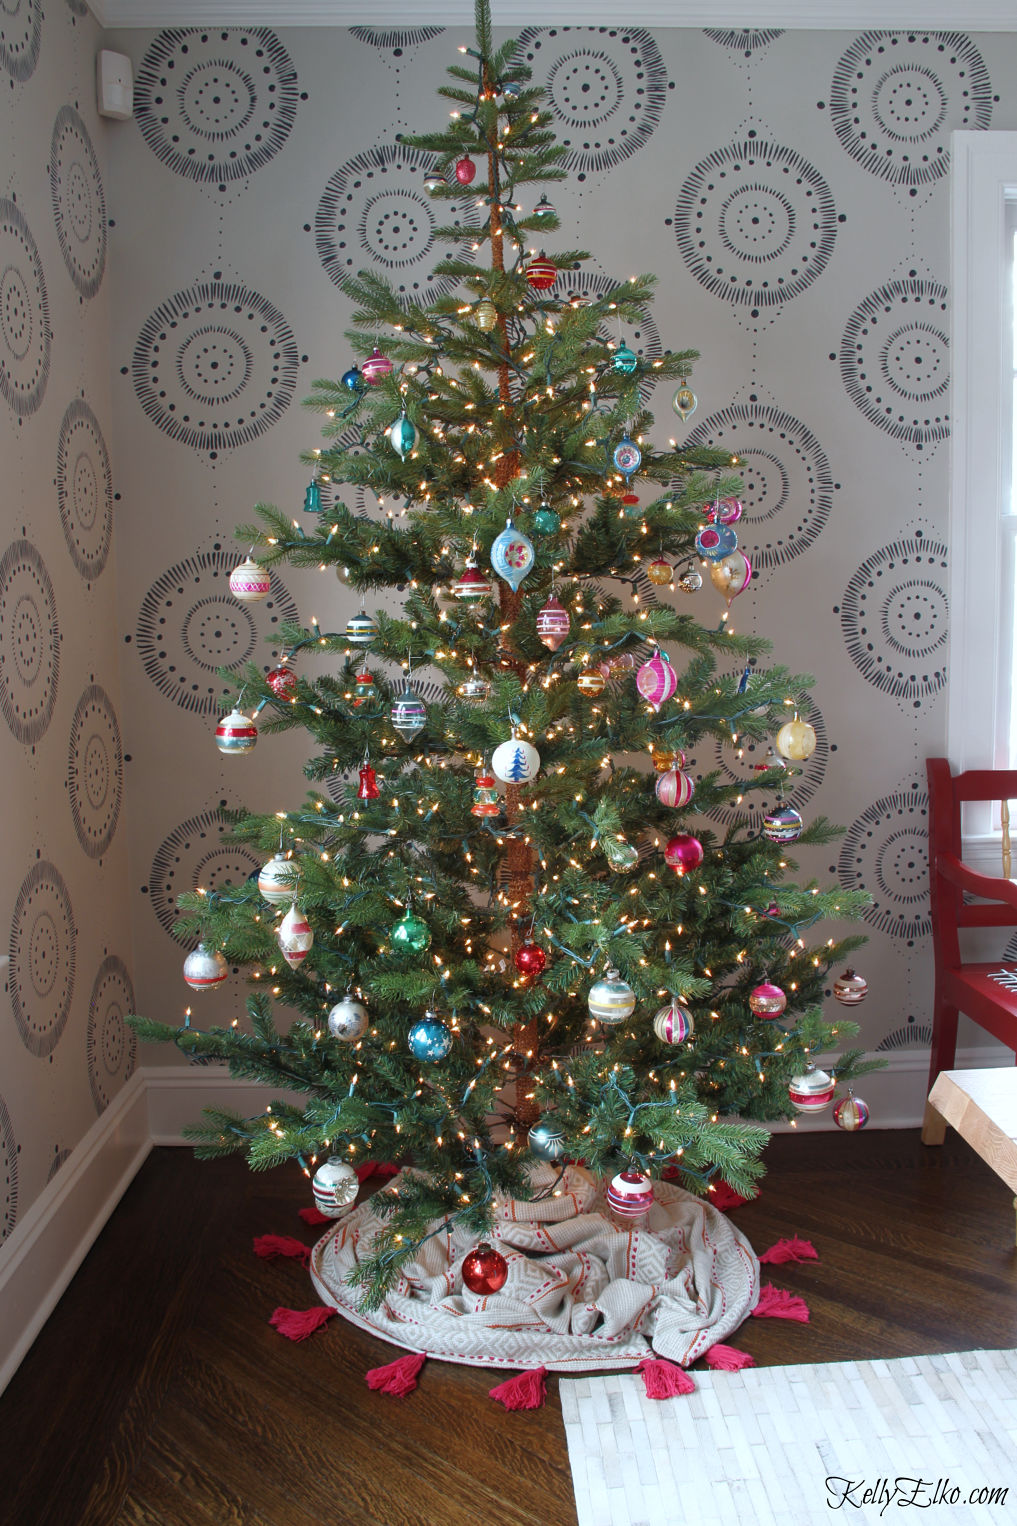 Love this sparse Christmas tree filled with vintage Shiny Brite ornaments and how cool is the tassel tree skirt kellyelko.com #christmastree #christmasdecor #christmasdecorations #christmaslights #diychristmas #treeskirt 